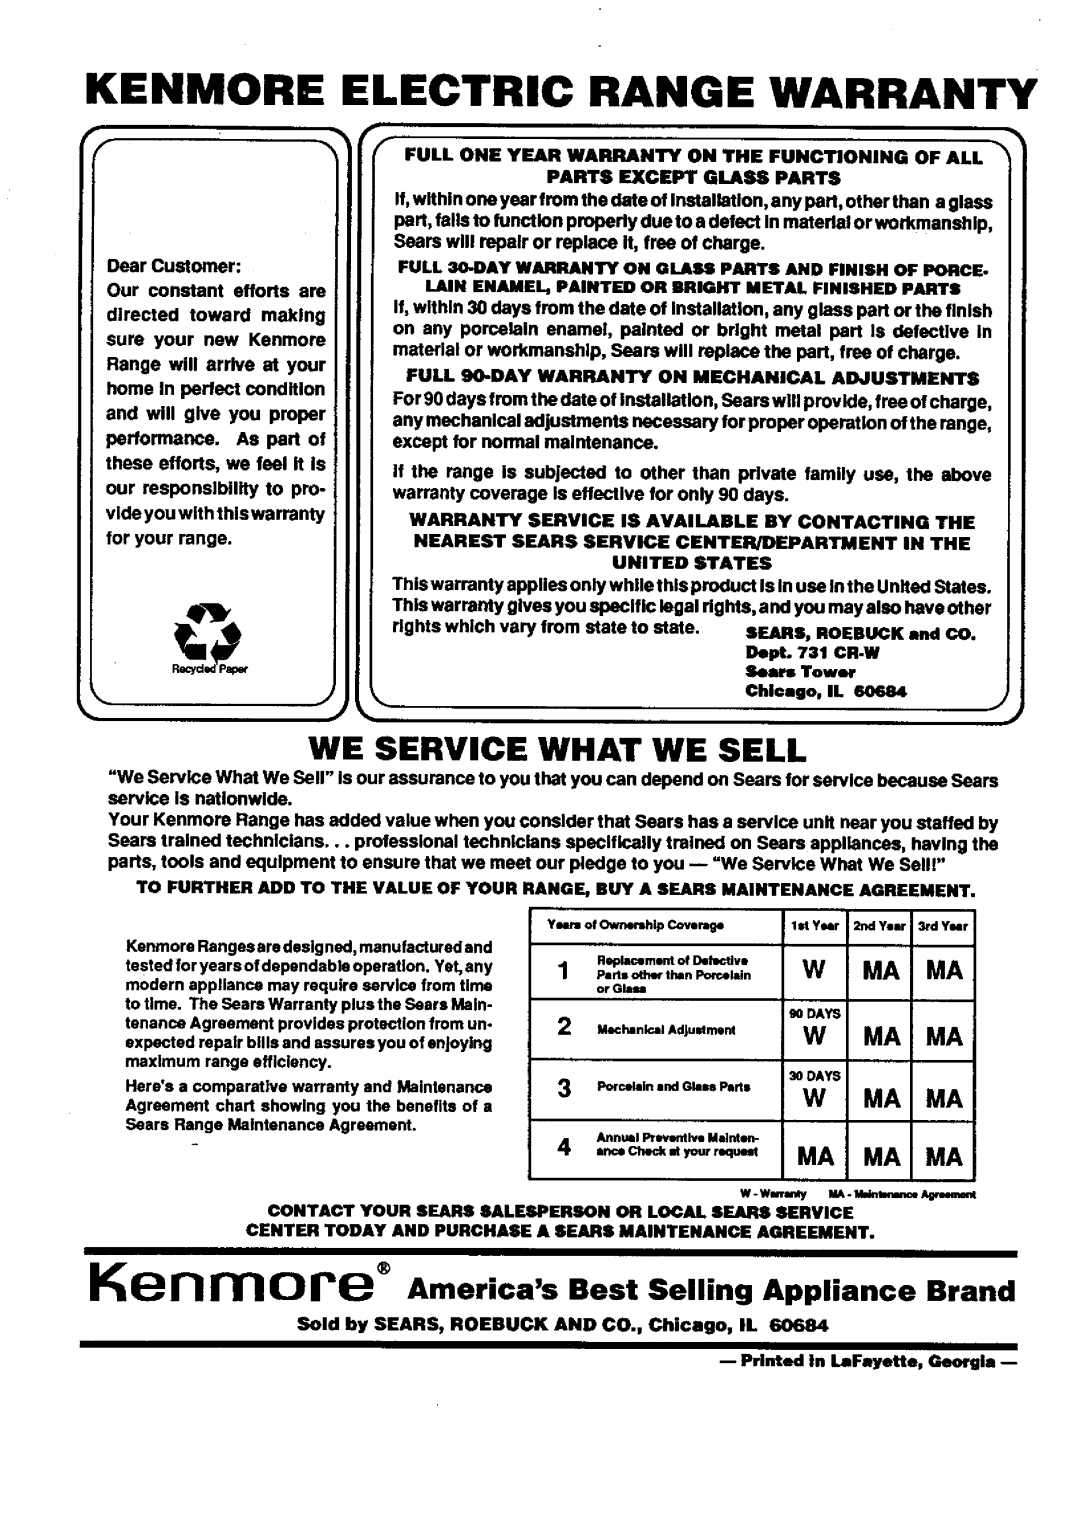 Sears 45221, 45321 Kenmore Electric Range Warranty, PcrcelalnandGlauPart,w, h.. .,A,lu.m.4, c .c, We Service What We Sell 